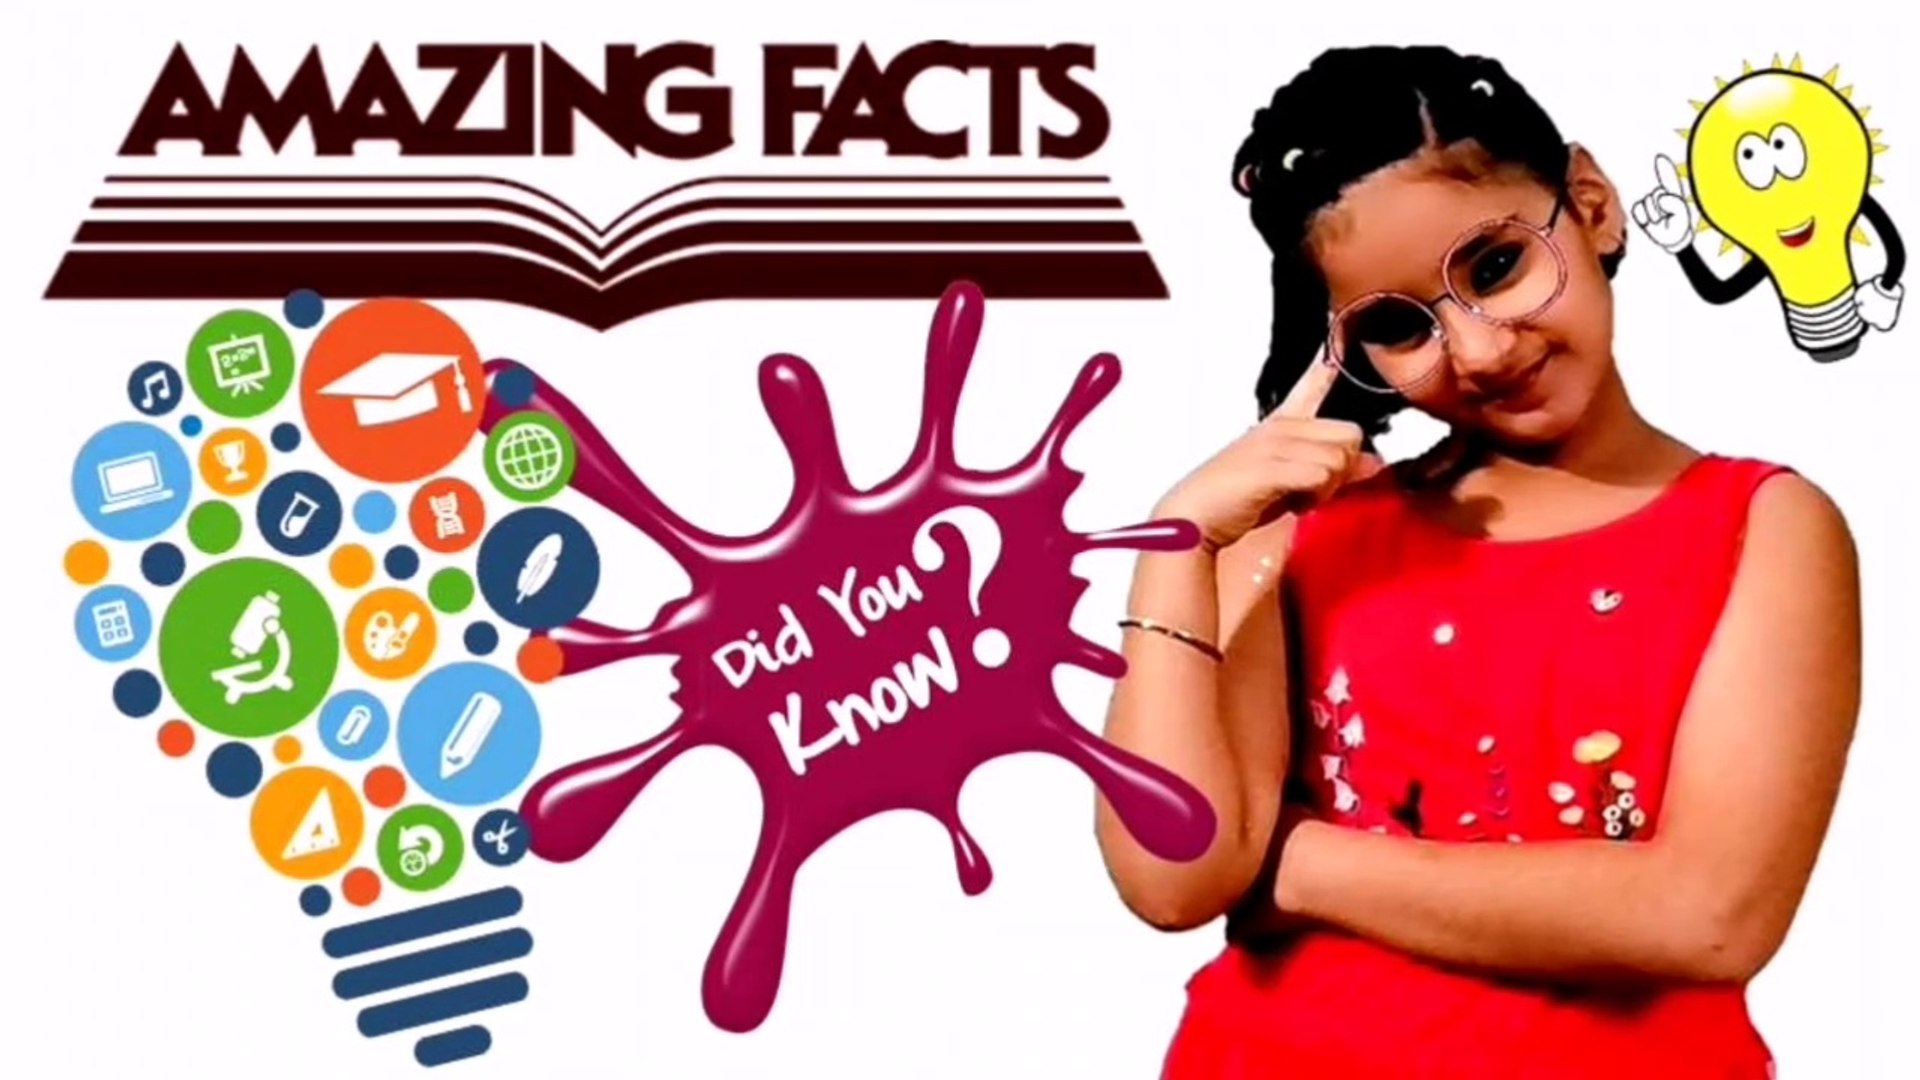 Top 10 Amazing Facts | Smart kids | Smart learning | Smart education |